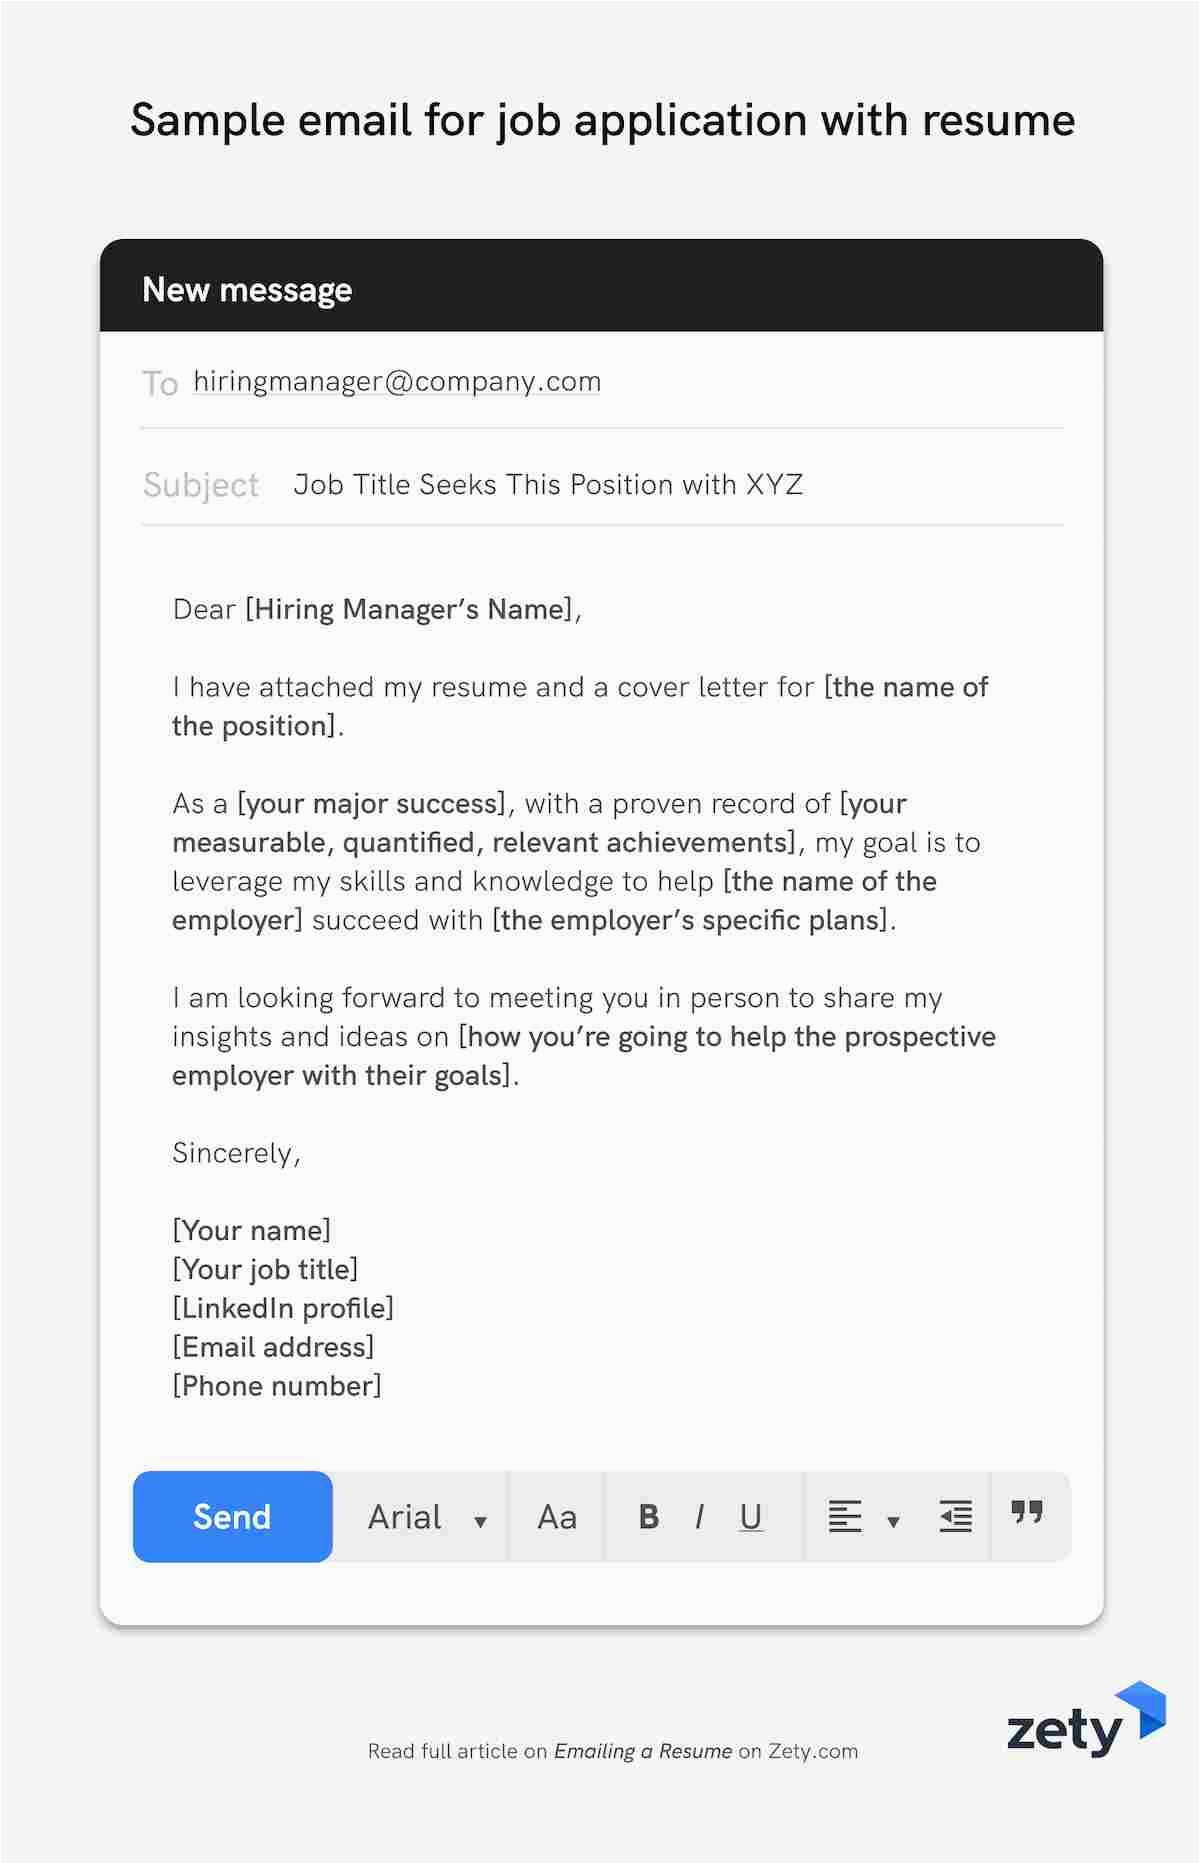 Sample Email for Hiring Manager with Coer Letter and Resume Emails Samples for Job Application